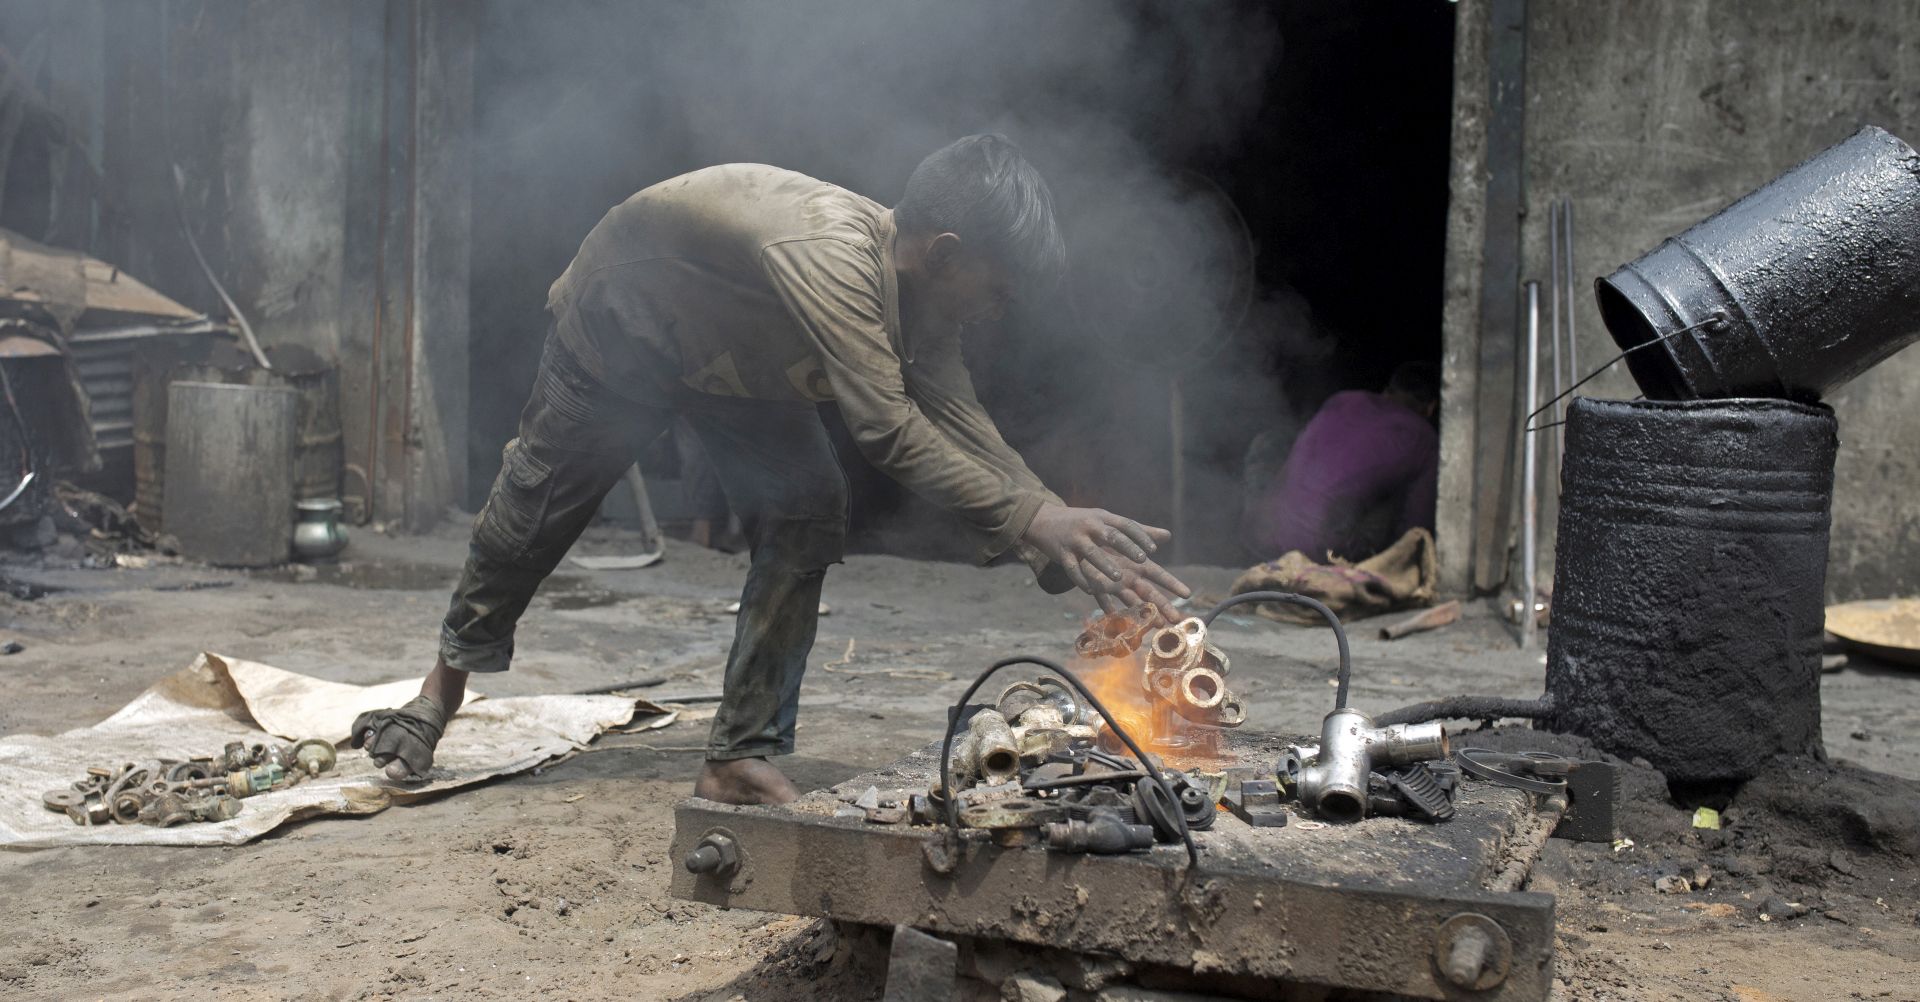 epa06802053 Ten-years old Sayed works without any safety gear as he melts scrap metal in a dockyard workshop in Keraniganj, Dhaka, Bangladesh, on World Day Against Child Labour (WDACL), 12 May 2018. The theme of this year's the World Day Against Child Labor (WDACL) and the World Day for Safety and Health at Work (Safe Day) shines 'a spotlight on the global need to improve the safe and health of young workers and end child labour' as the International Labour Organization (ILO) announced on their website.  EPA/MONIRUL ALAM